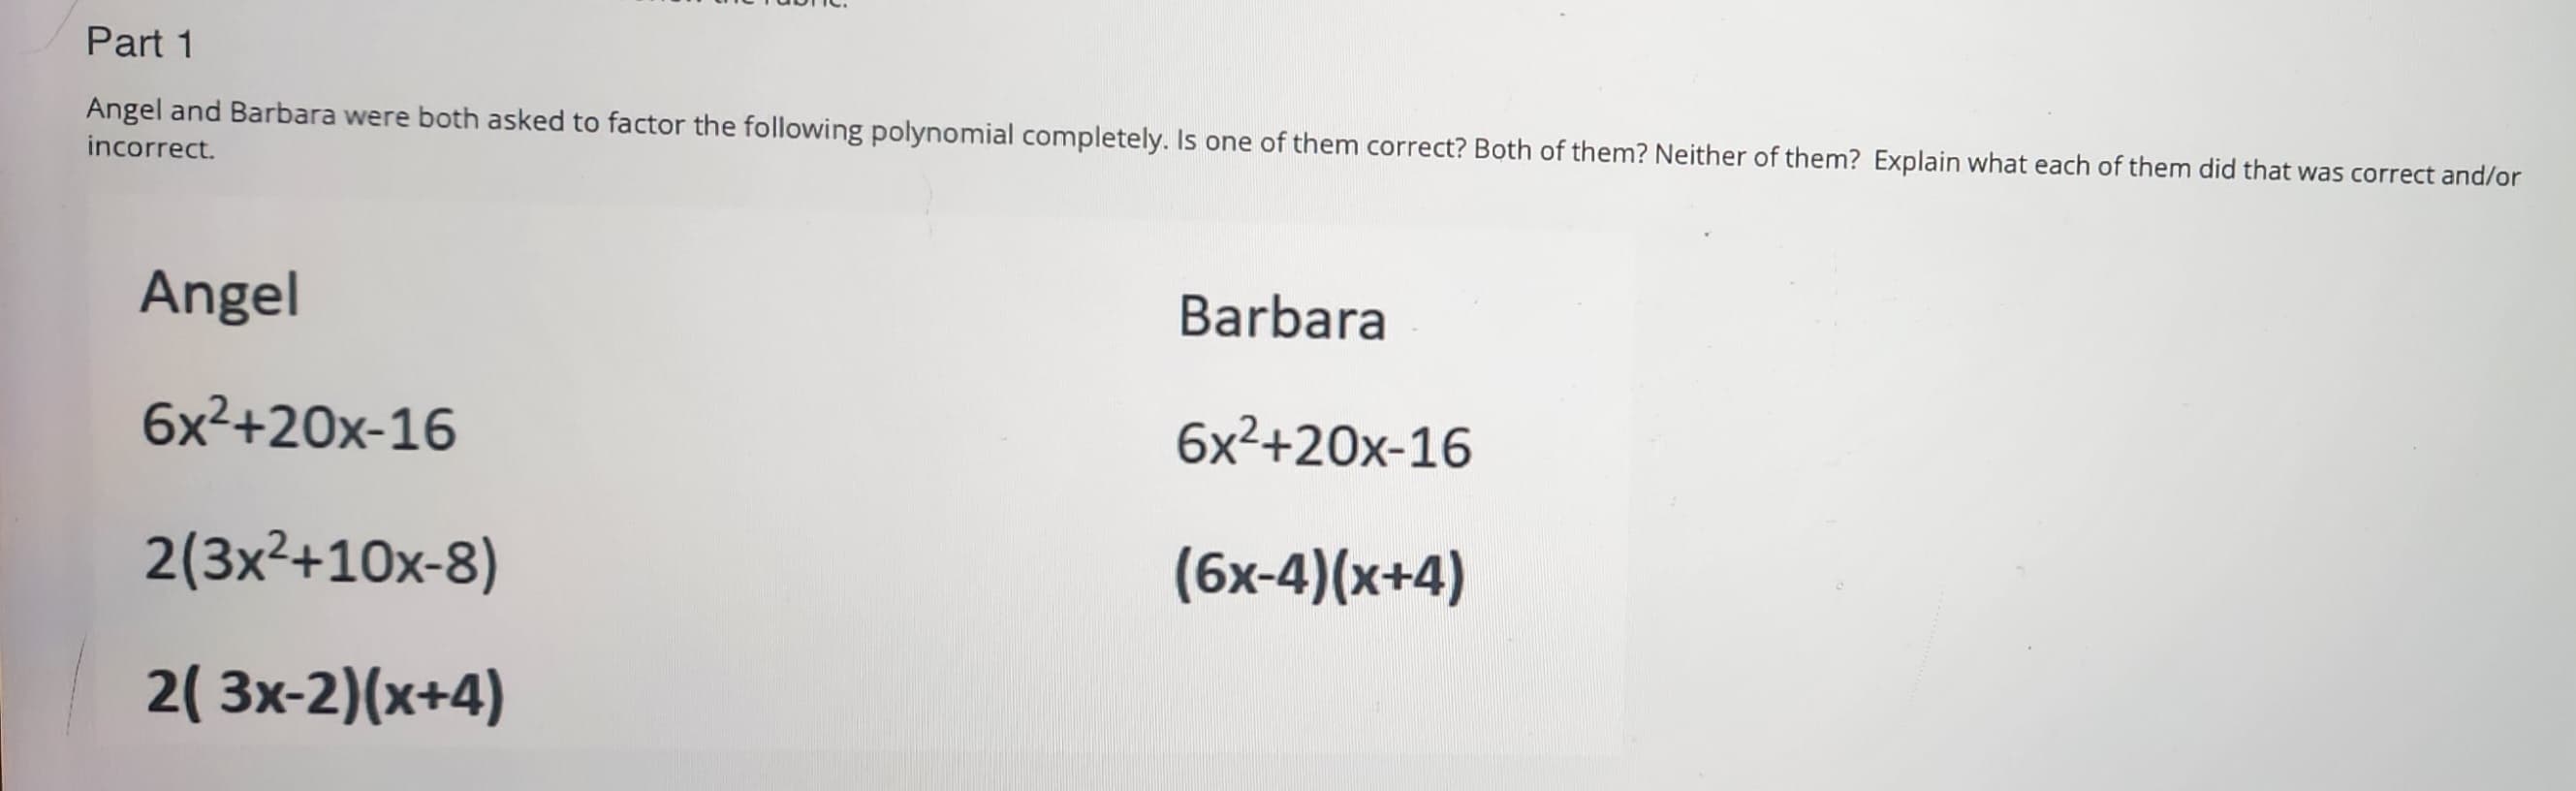 Part 1
Angel and Barbara were both asked to factor the following polynomial completely. Is one of them correct? Both of them? Neither of them? Explain what each of them did that was correct and/or
incorrect.
Angel
6x²+20x-16
2(3x²+10x-8)
2( 3x-2)(x+4)
Barbara
6x²+20x-16
(6x-4)(x+4)